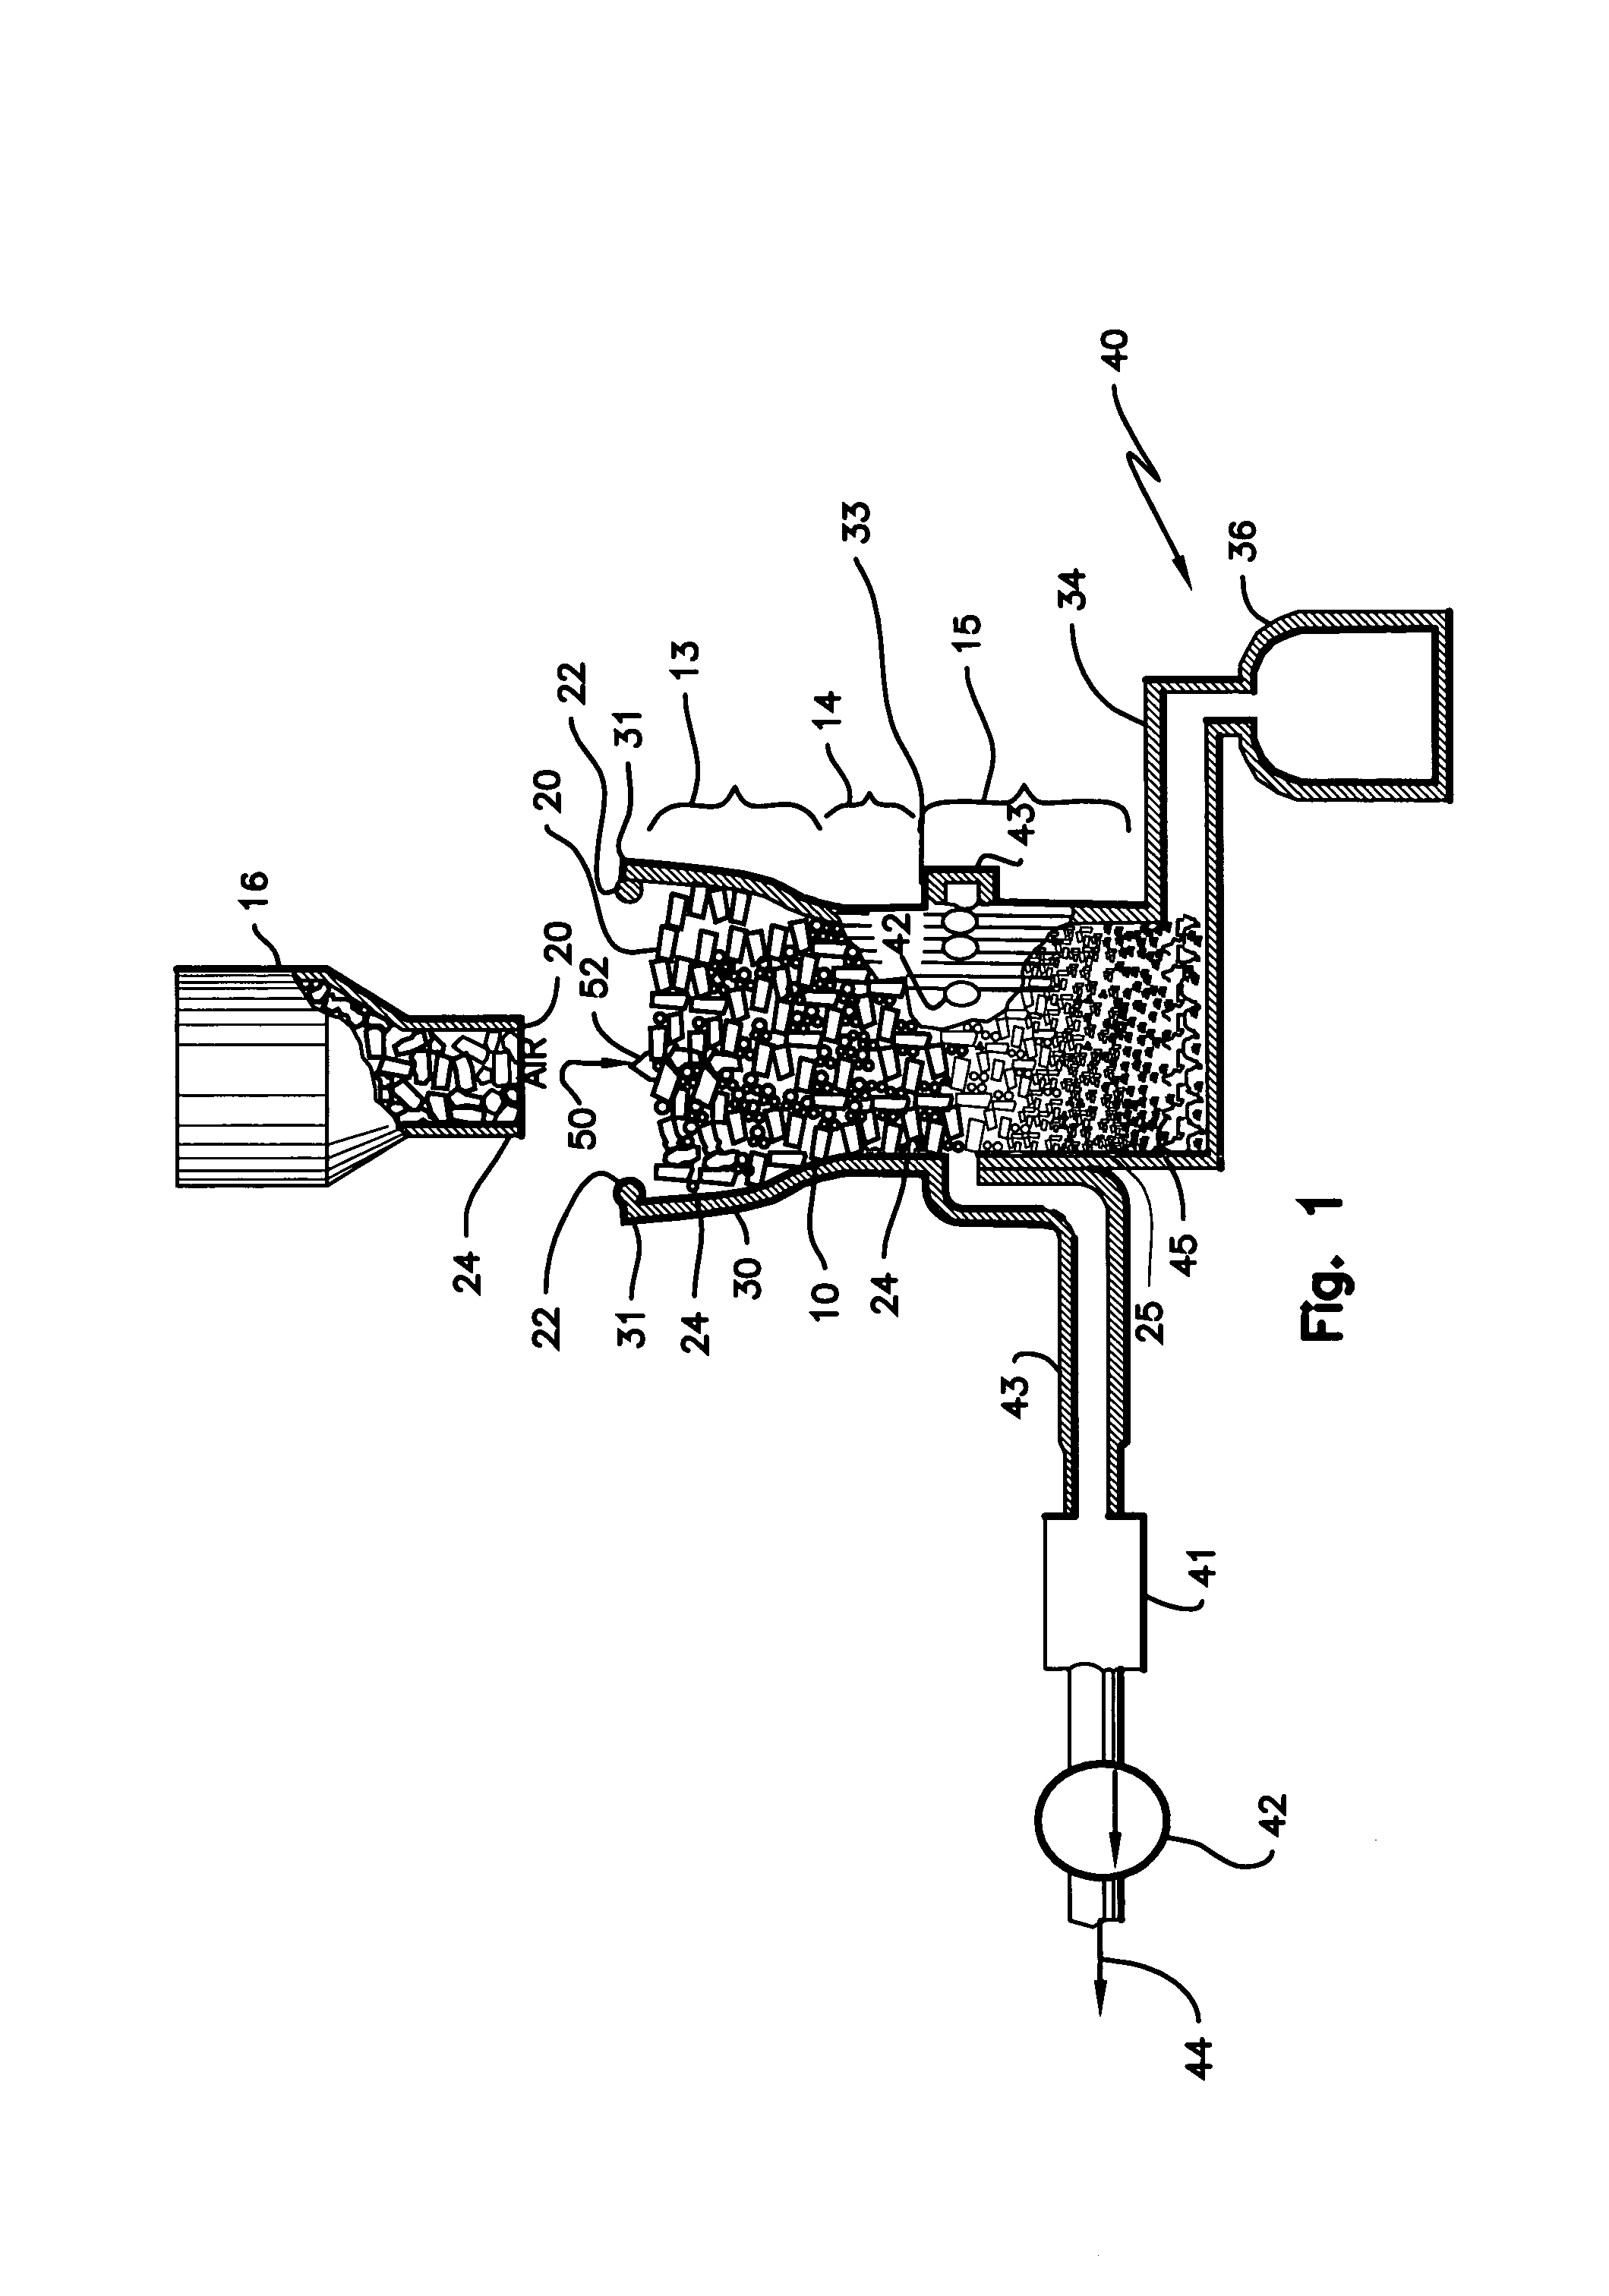 Method of producing charcoal, conditioned fuel gas and potassium from biomass